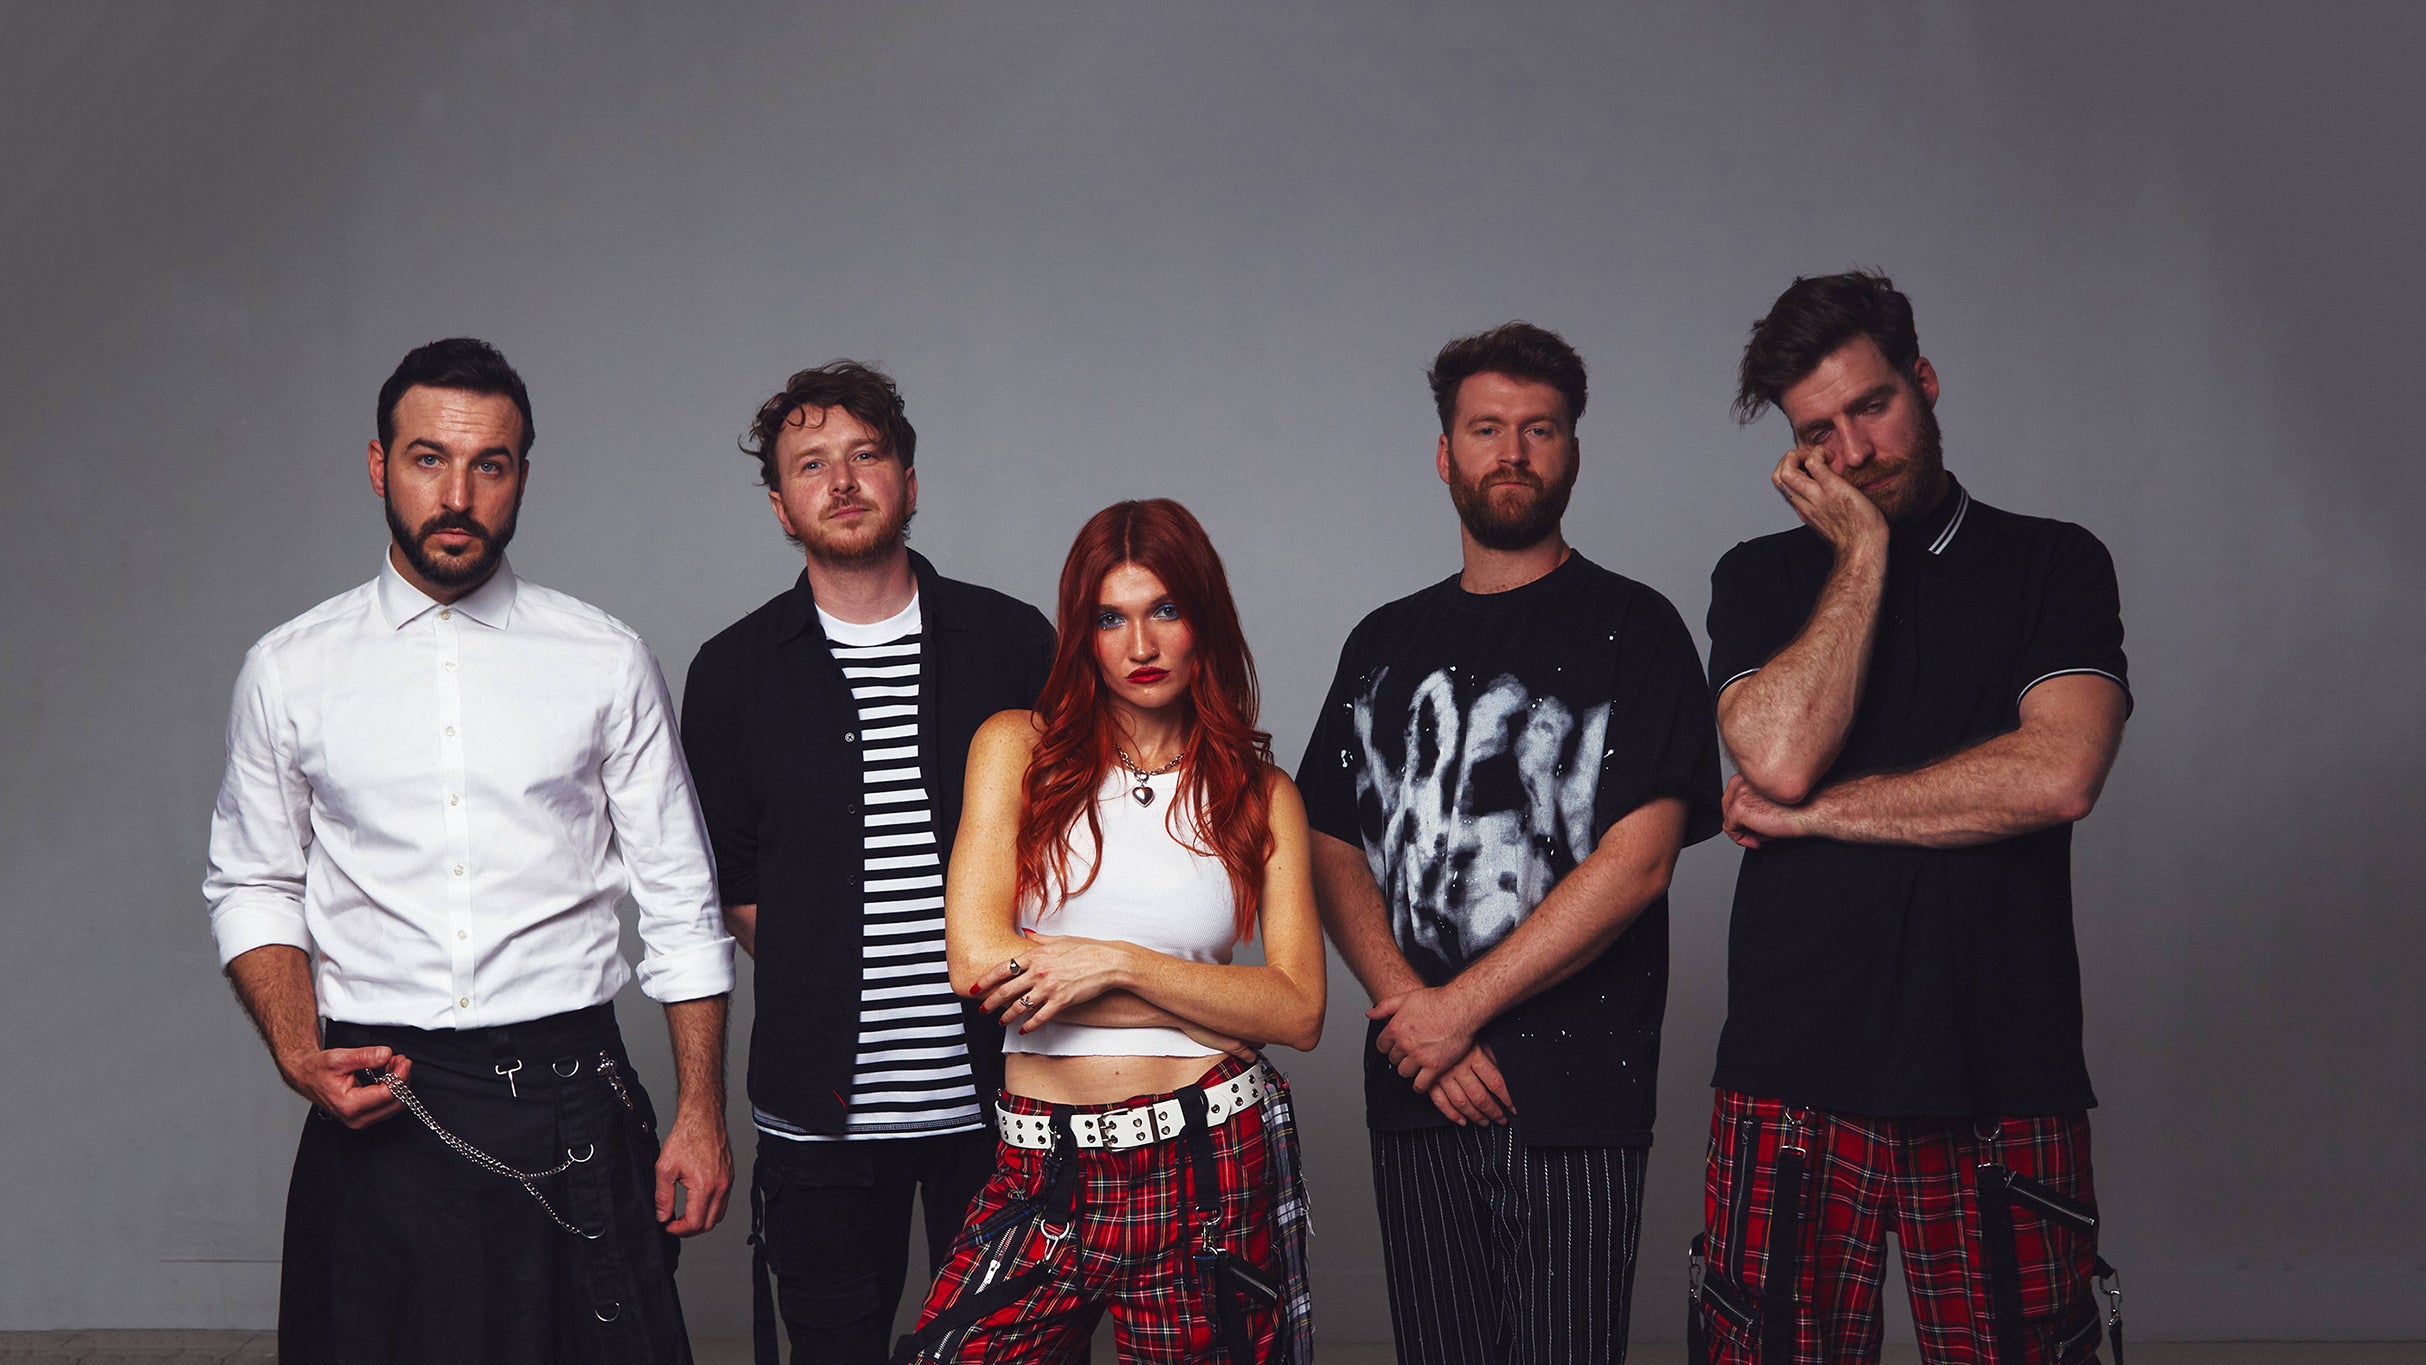 new presale c0de for MisterWives: Just For One Night!  affordable tickets in Sacramento at Ace of Spades